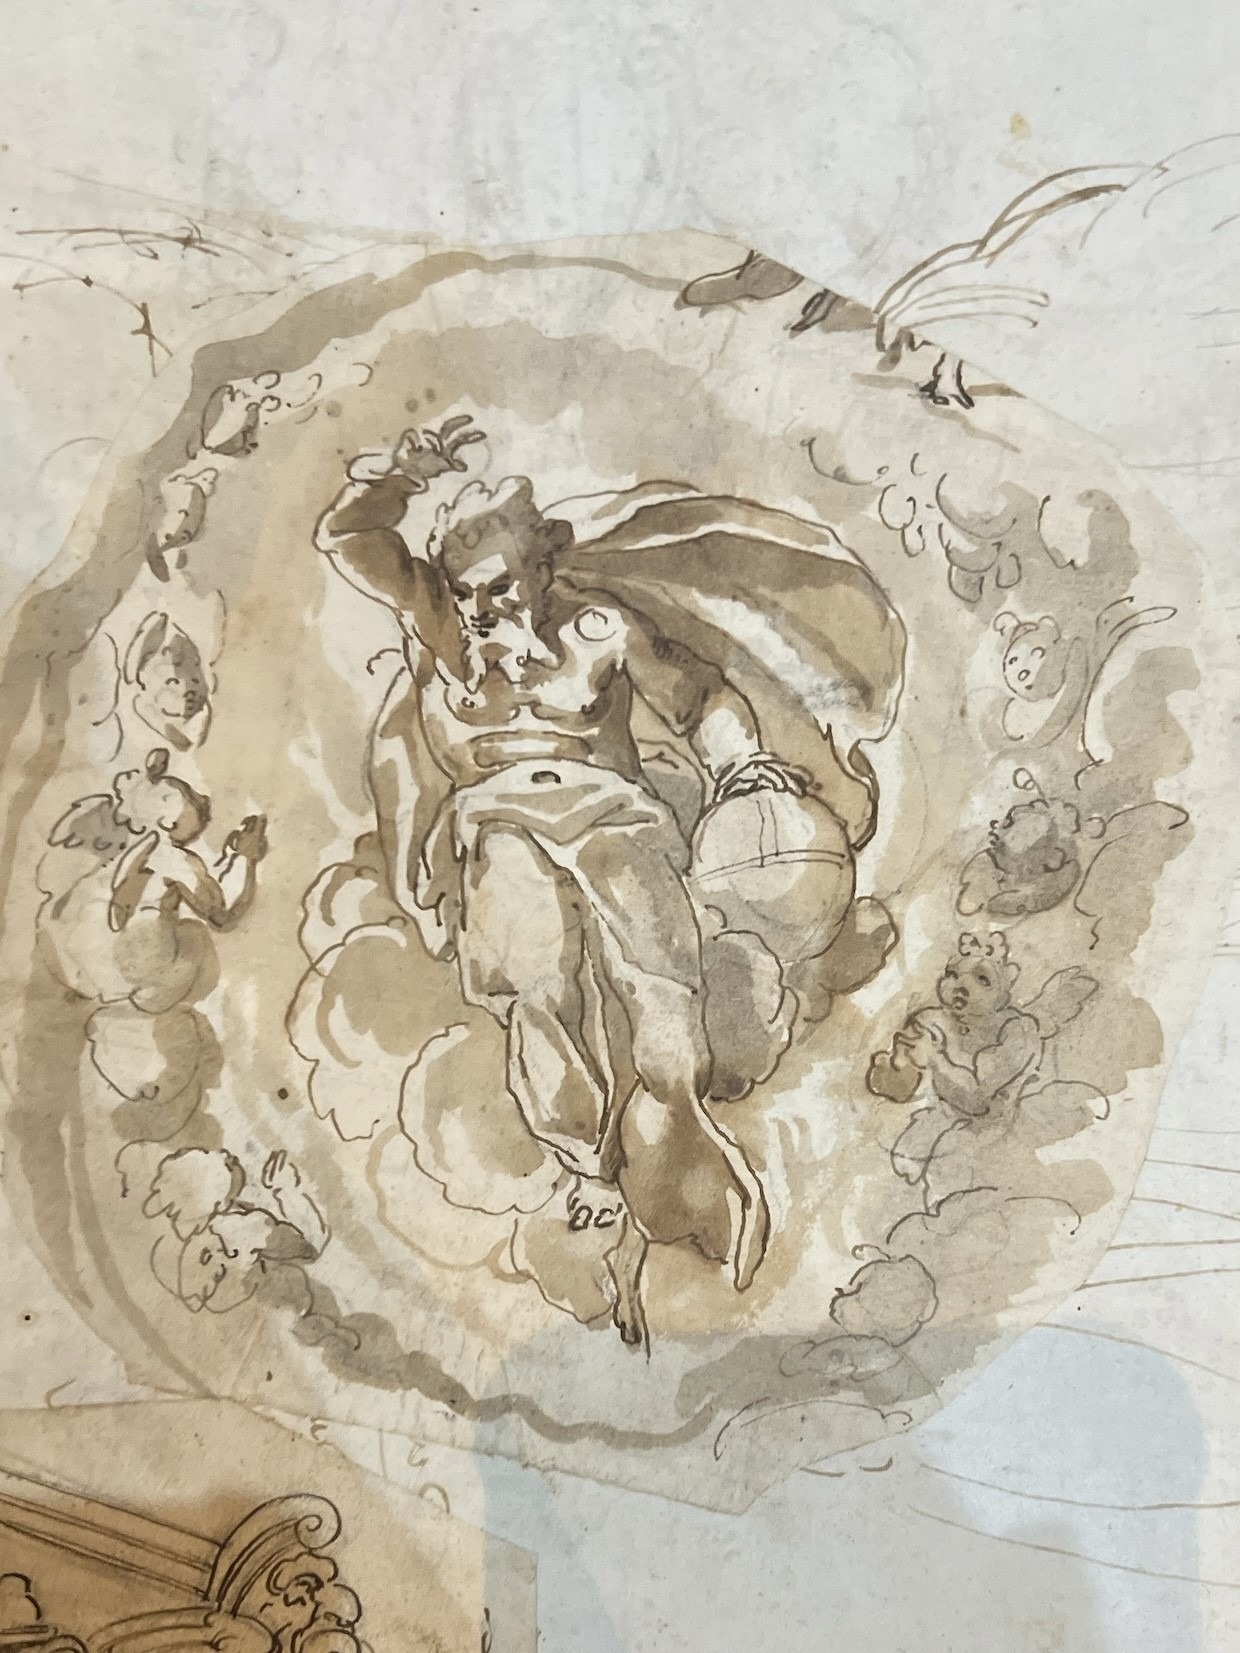 MANNER OF LUCA GIORDANO, NAPLES, 1634 - 1705, 17TH CENTURY ITALIAN PEN, INK AND WASH DRAWING - Image 2 of 3